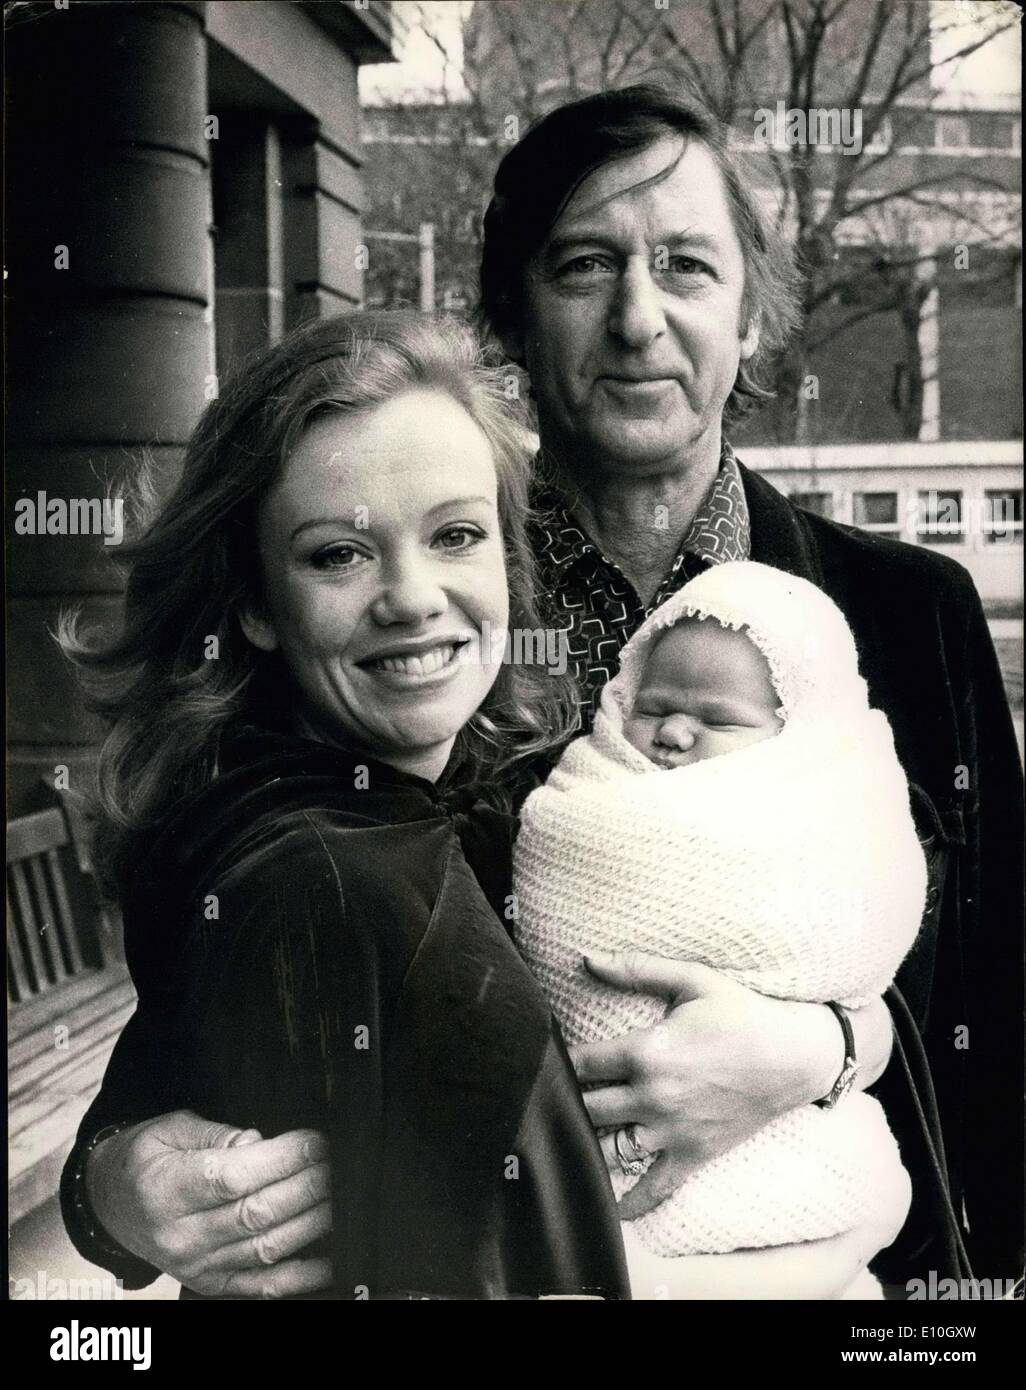 Jan. 29, 1973 - Hayley Takes Her Baby Home: Film producer Roy Boulting, 59, with his wife, actress Haley Mills, 26, and their week-old son. Cristian John David, leaving Queen Charlotte's hospital, Hammersmith, yesterday for their home in Chelsea. Stock Photo